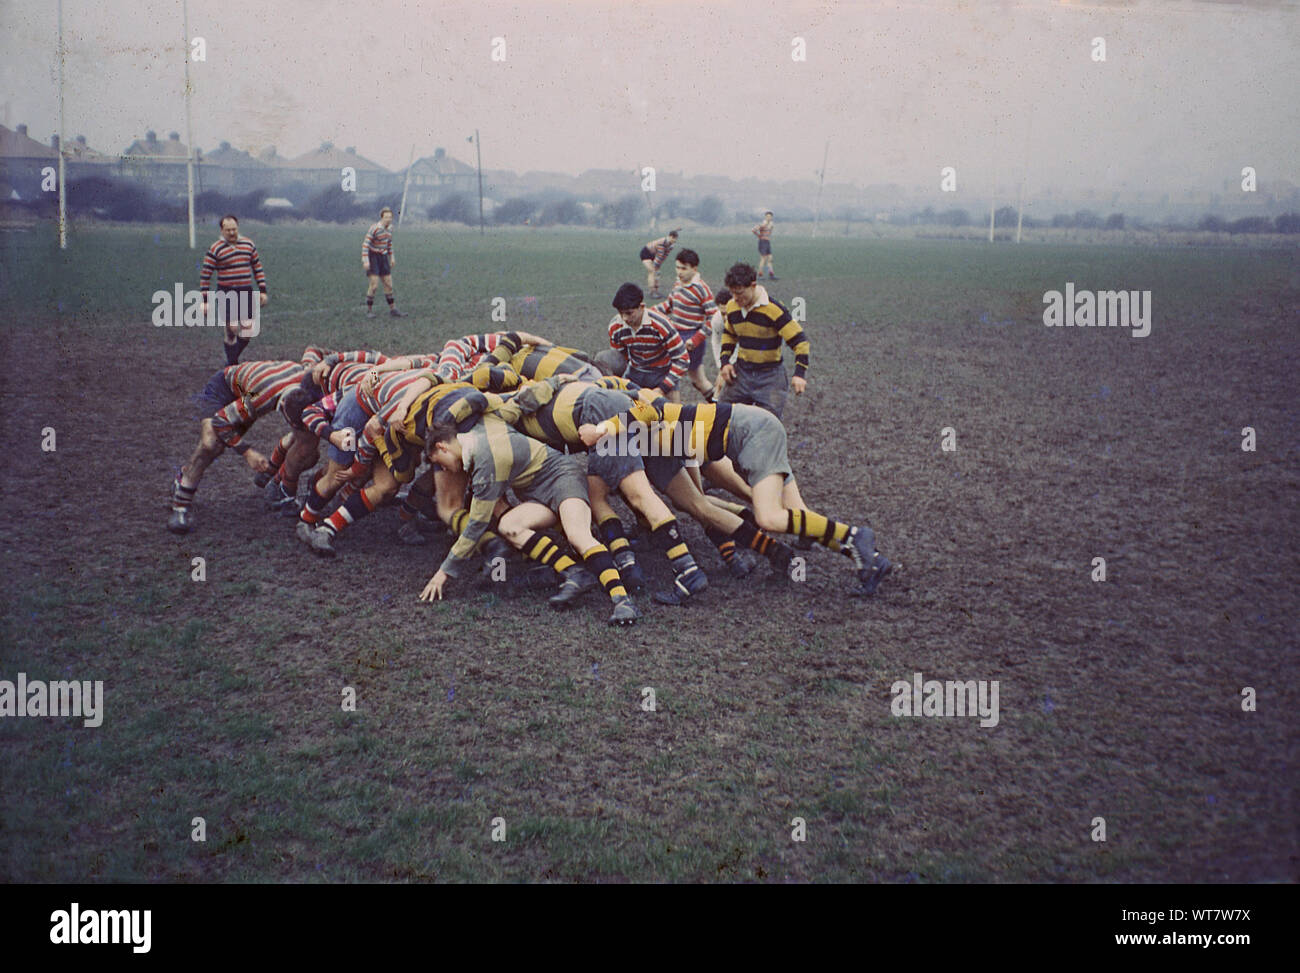 1960s, historical, amateur rugby union match at Wallasey, Wirral, England UK, outside on a muddy pitch, male players crouched down in a scrum Stock Photo